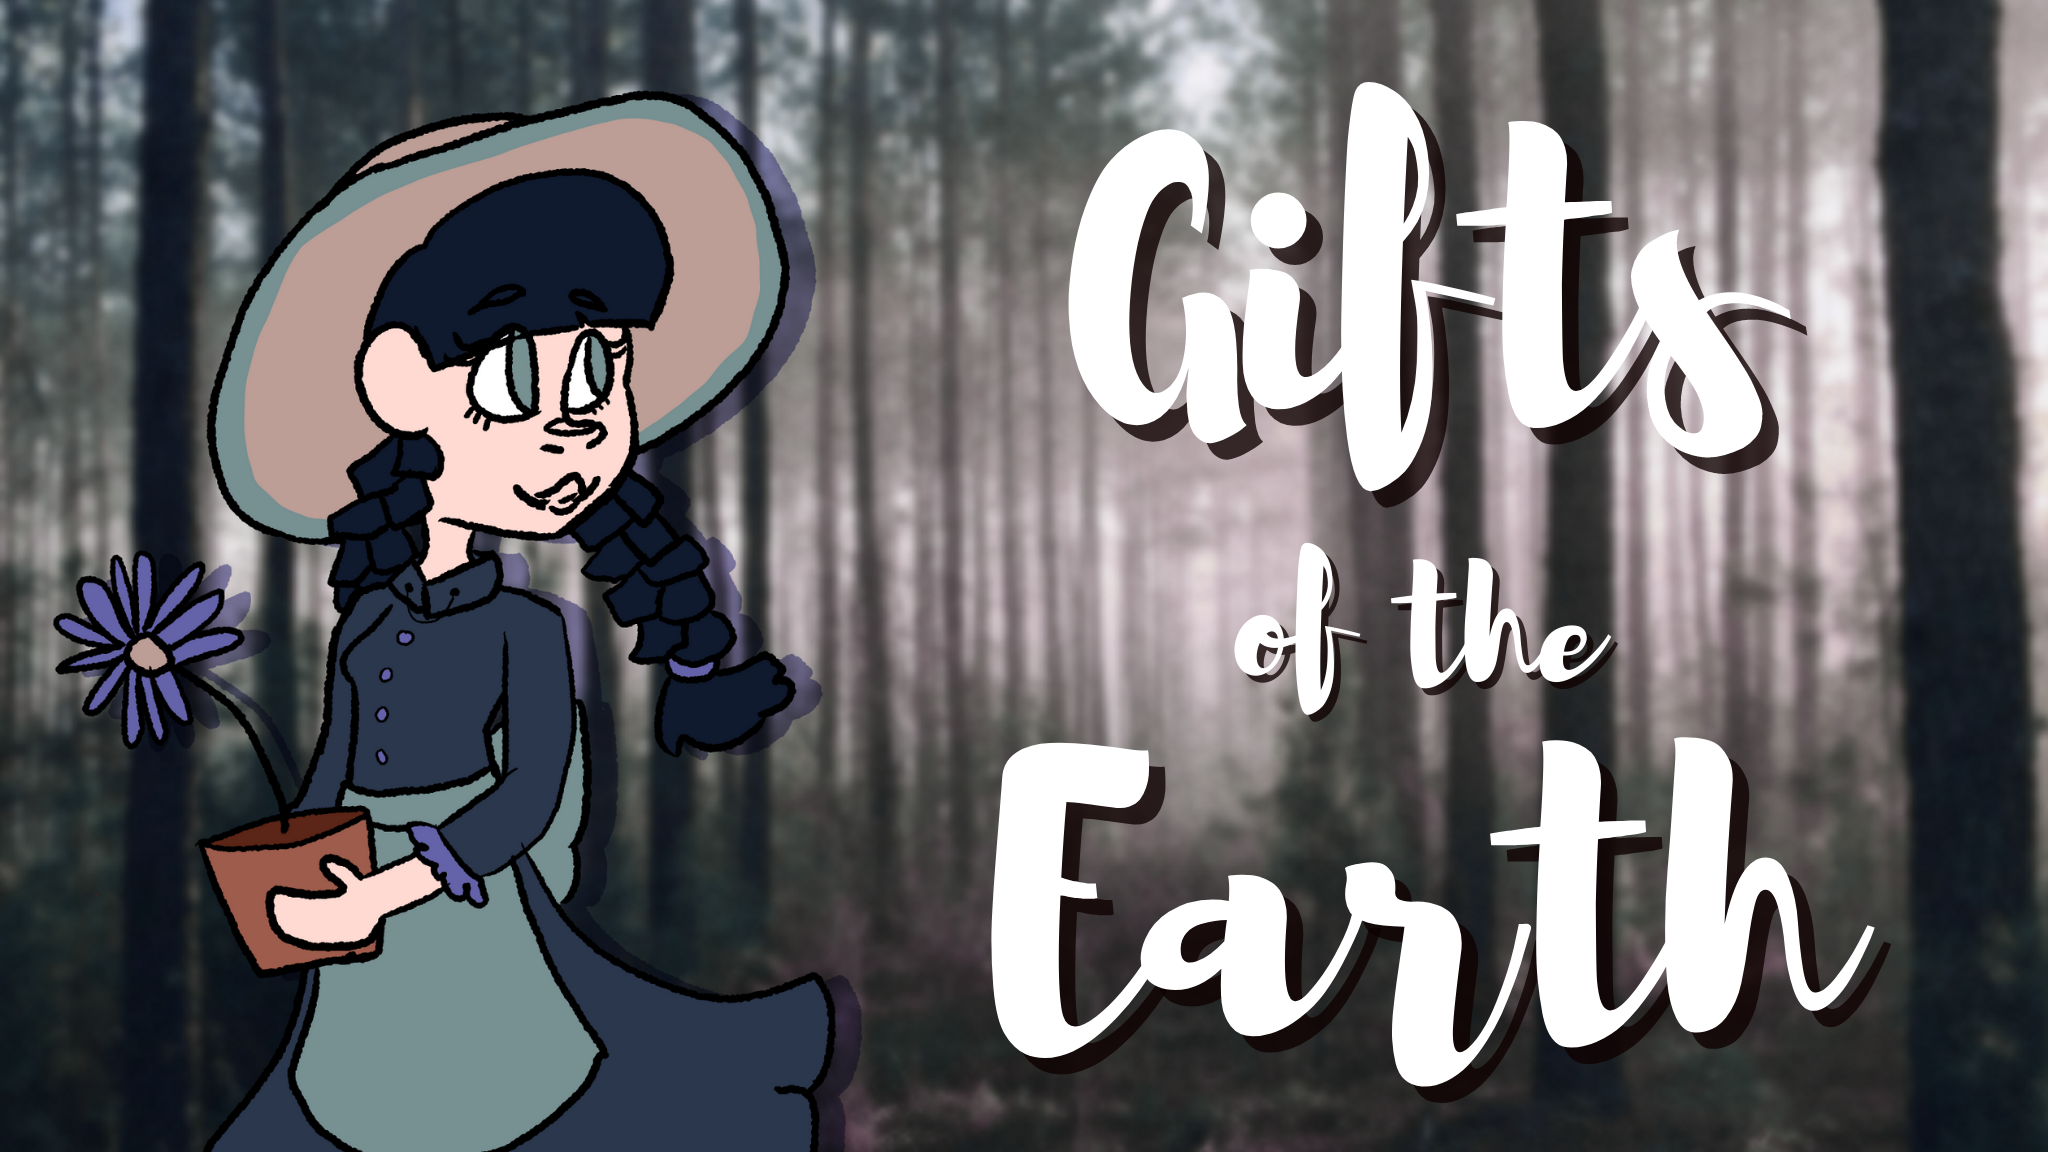 Gifts of the Earth